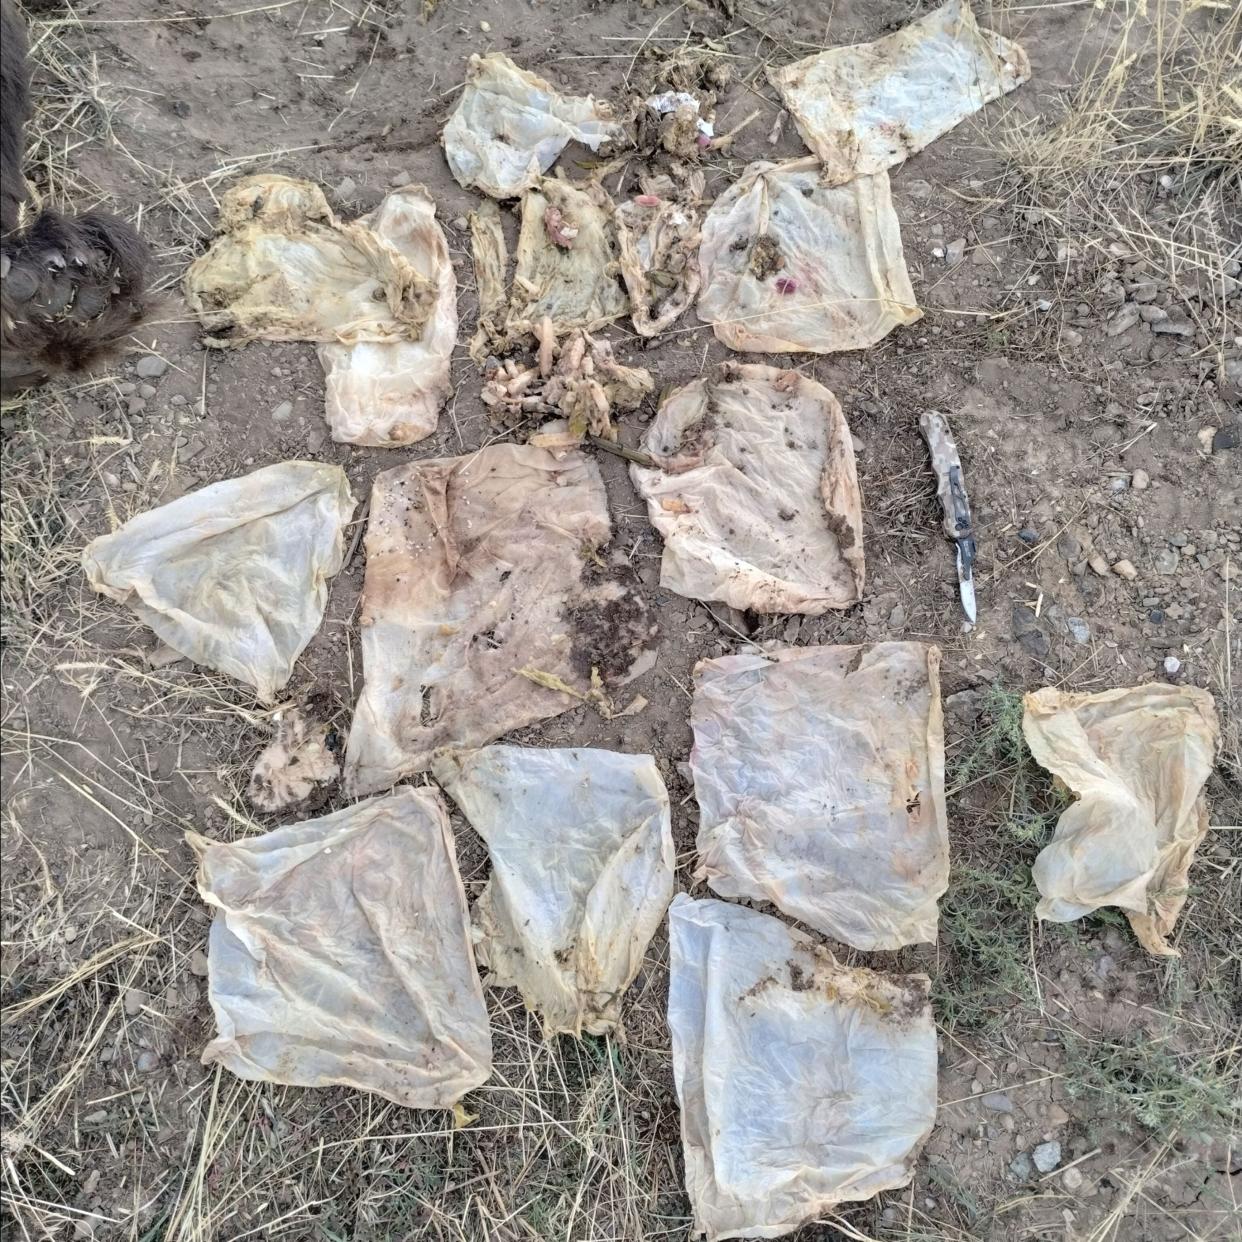 A photo shows wipes removed from the stomach of a black bear euthanized Sept. 9 in Telluride. The wipes, along with other trash, caused a severe intestinal blockage that prevented the bear from digesting food.